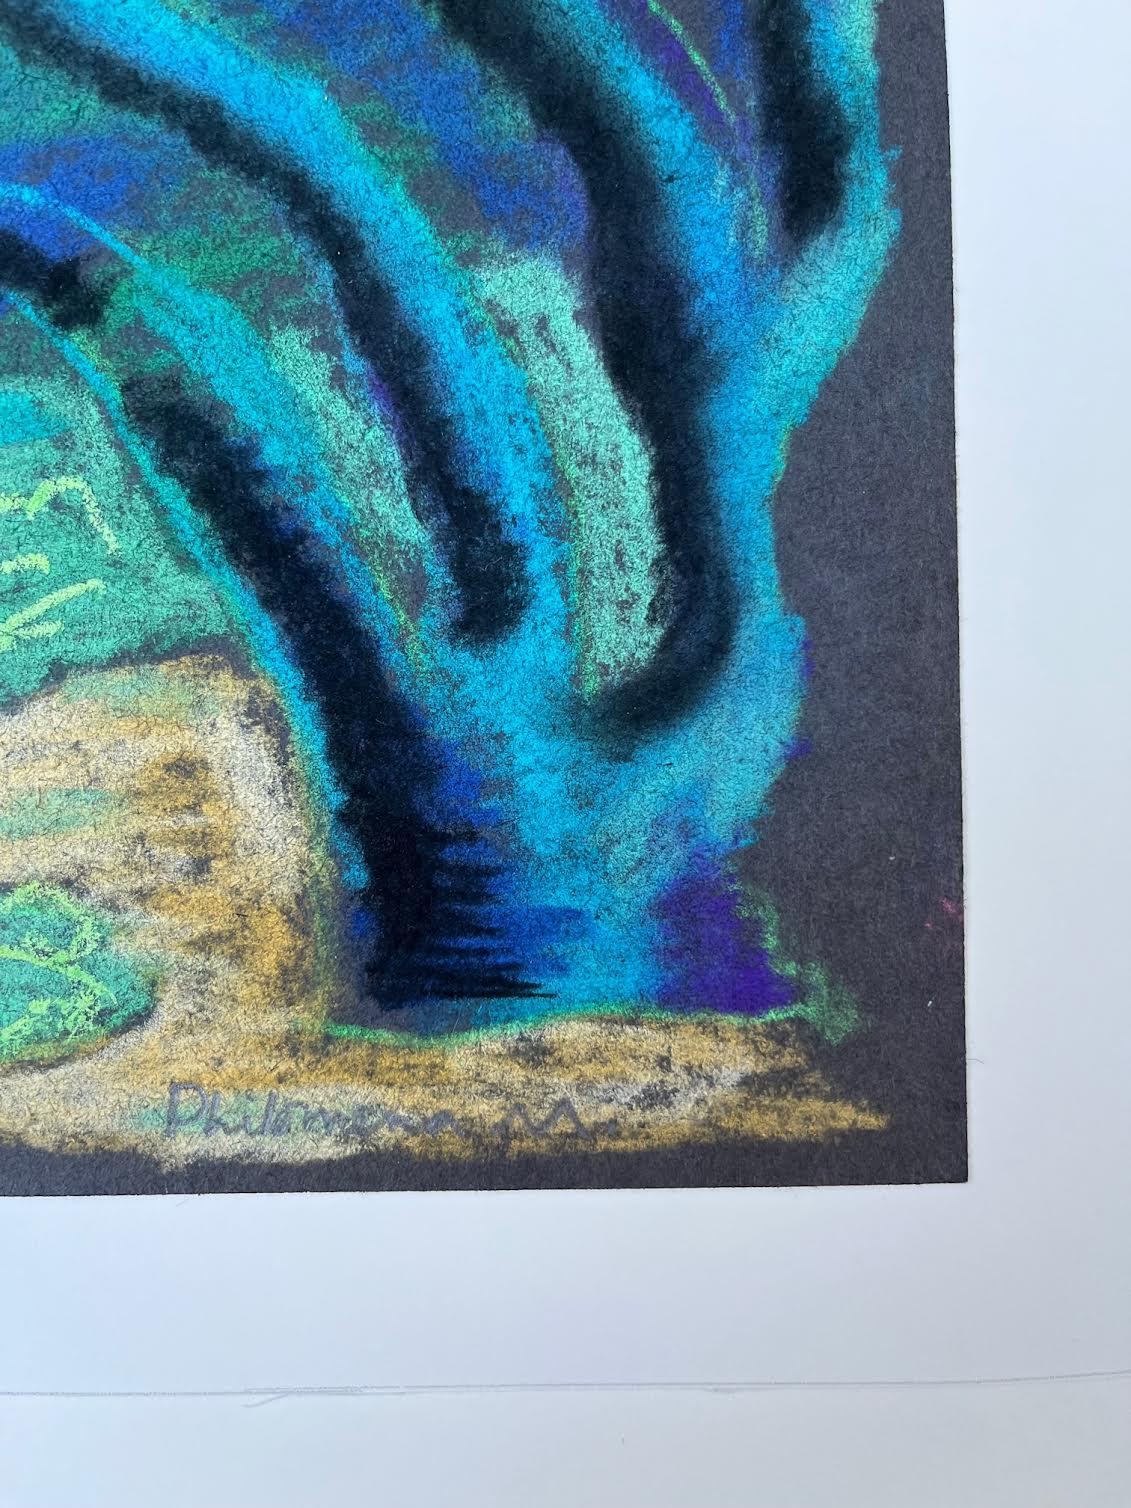 Pastel drawing on black paper , dark, colorful,  playful, mysterious life beneath the sea
 Nature, Corals, sea anemones,  magical abstract  creatures, glow, undersea design, aquarium

When framing, This artwork should be matted and spacers used to